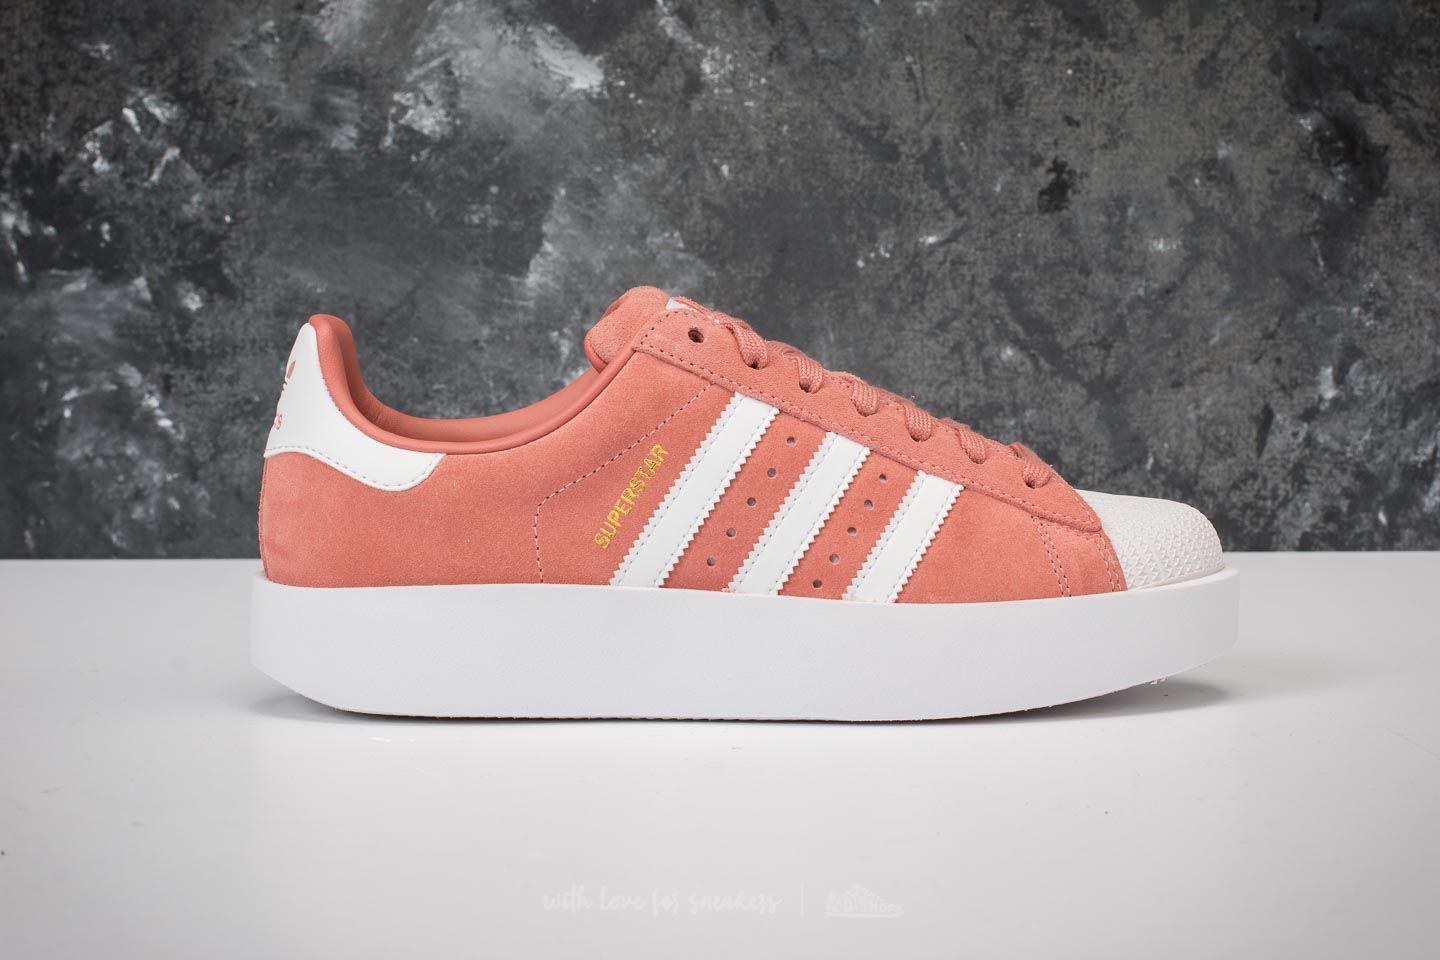 adidas superstar bold rosa Online Shopping for Women, Men, Kids Fashion &  Lifestyle|Free Delivery & Returns